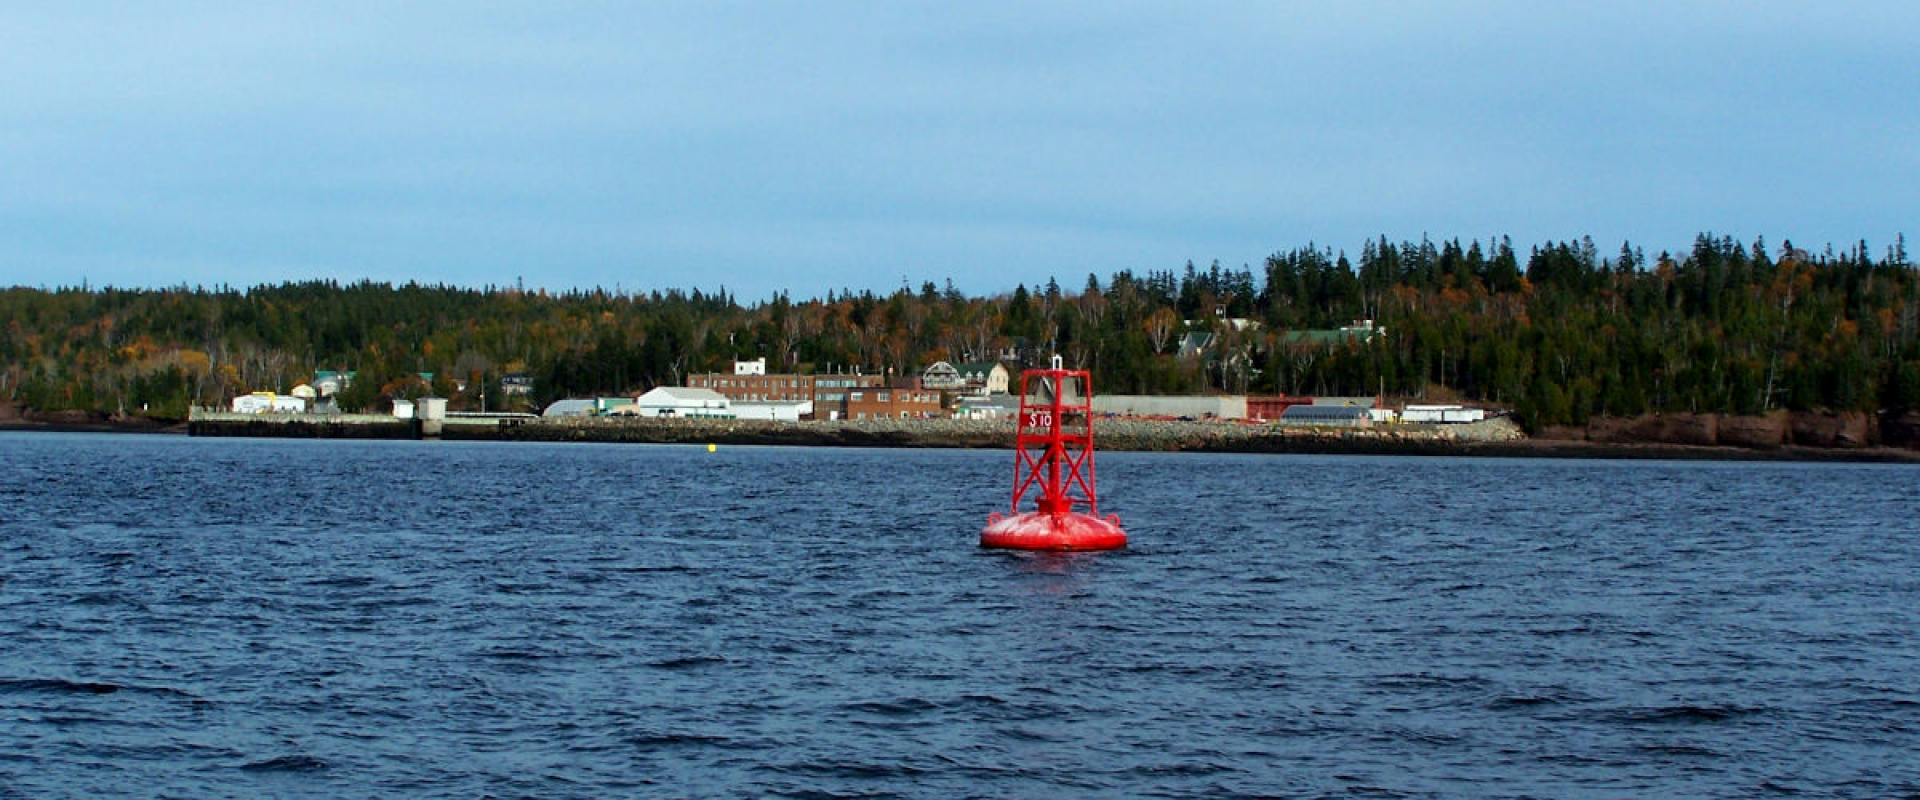 Blue skies and water with a biological station on the far shore. There is a red bell buoy in the foreground. 